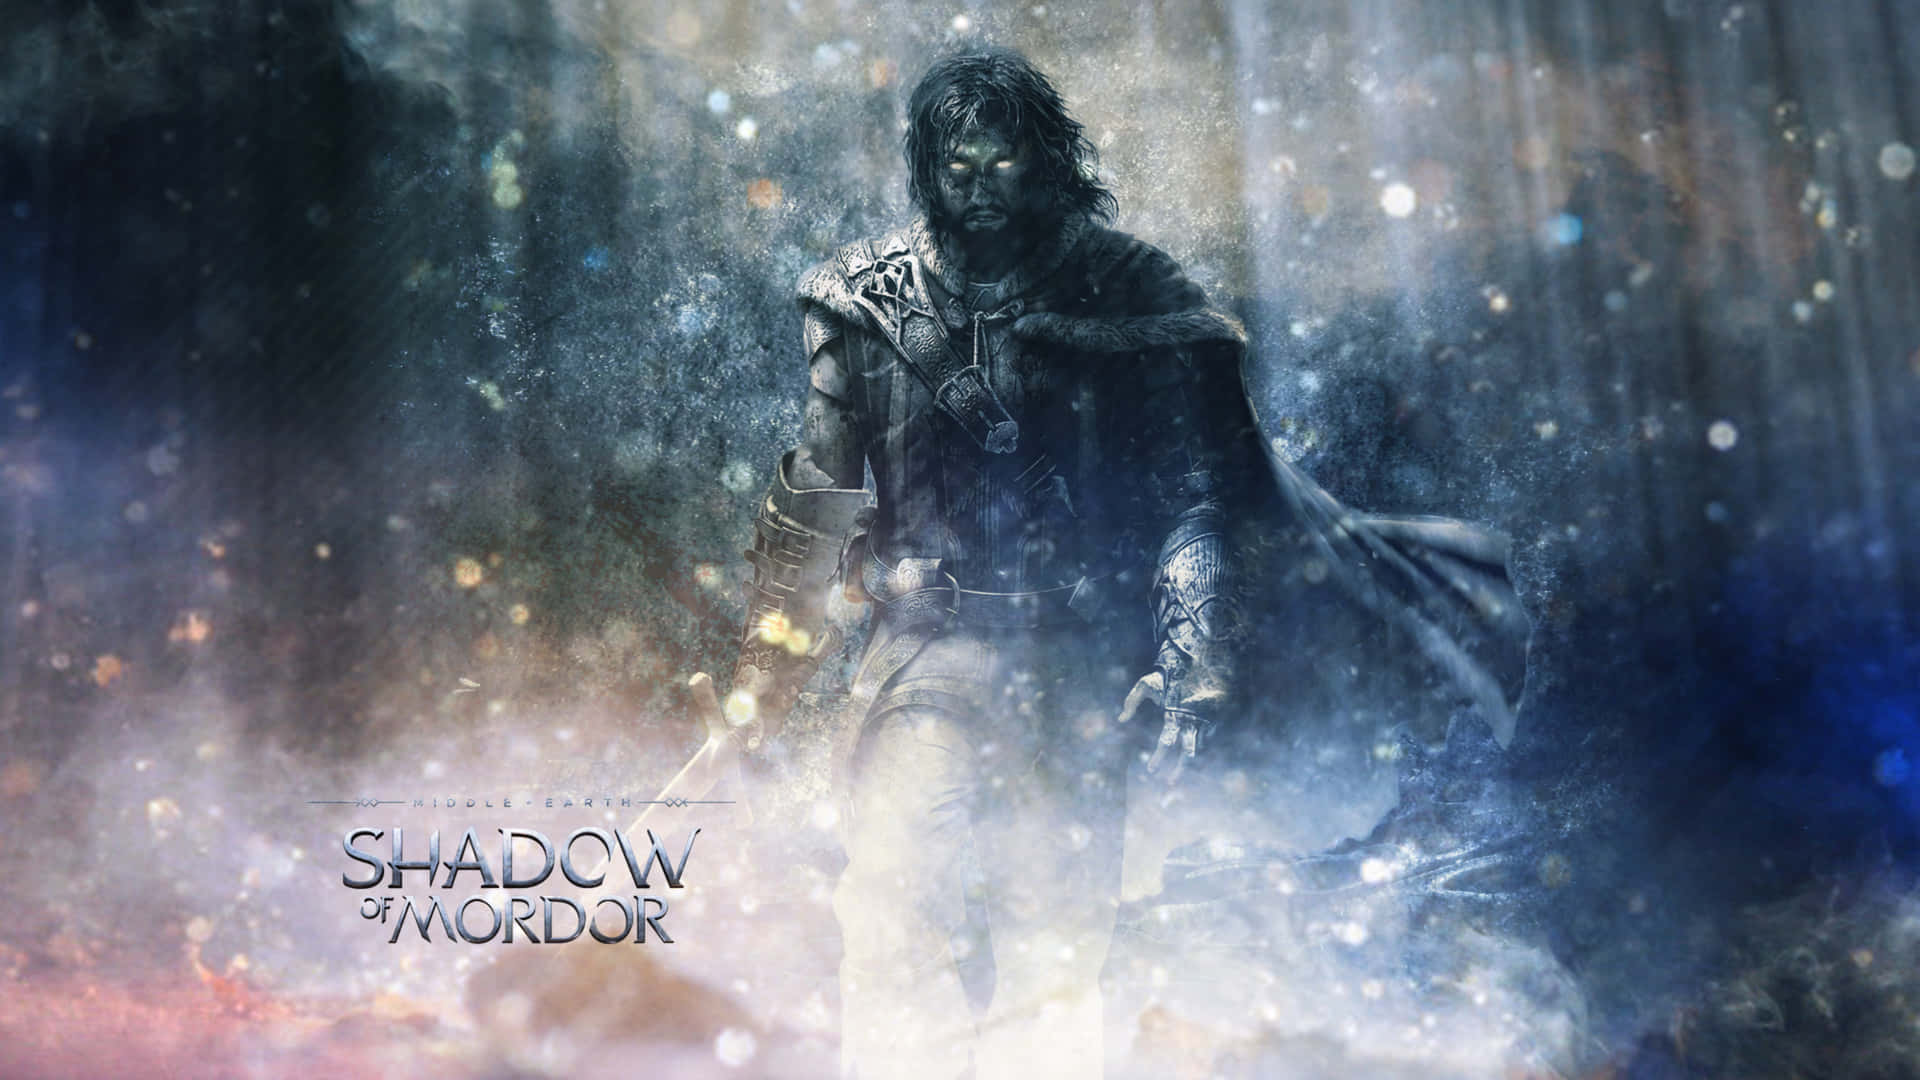 Glowing Light 4k Shadow Of Mordor Background